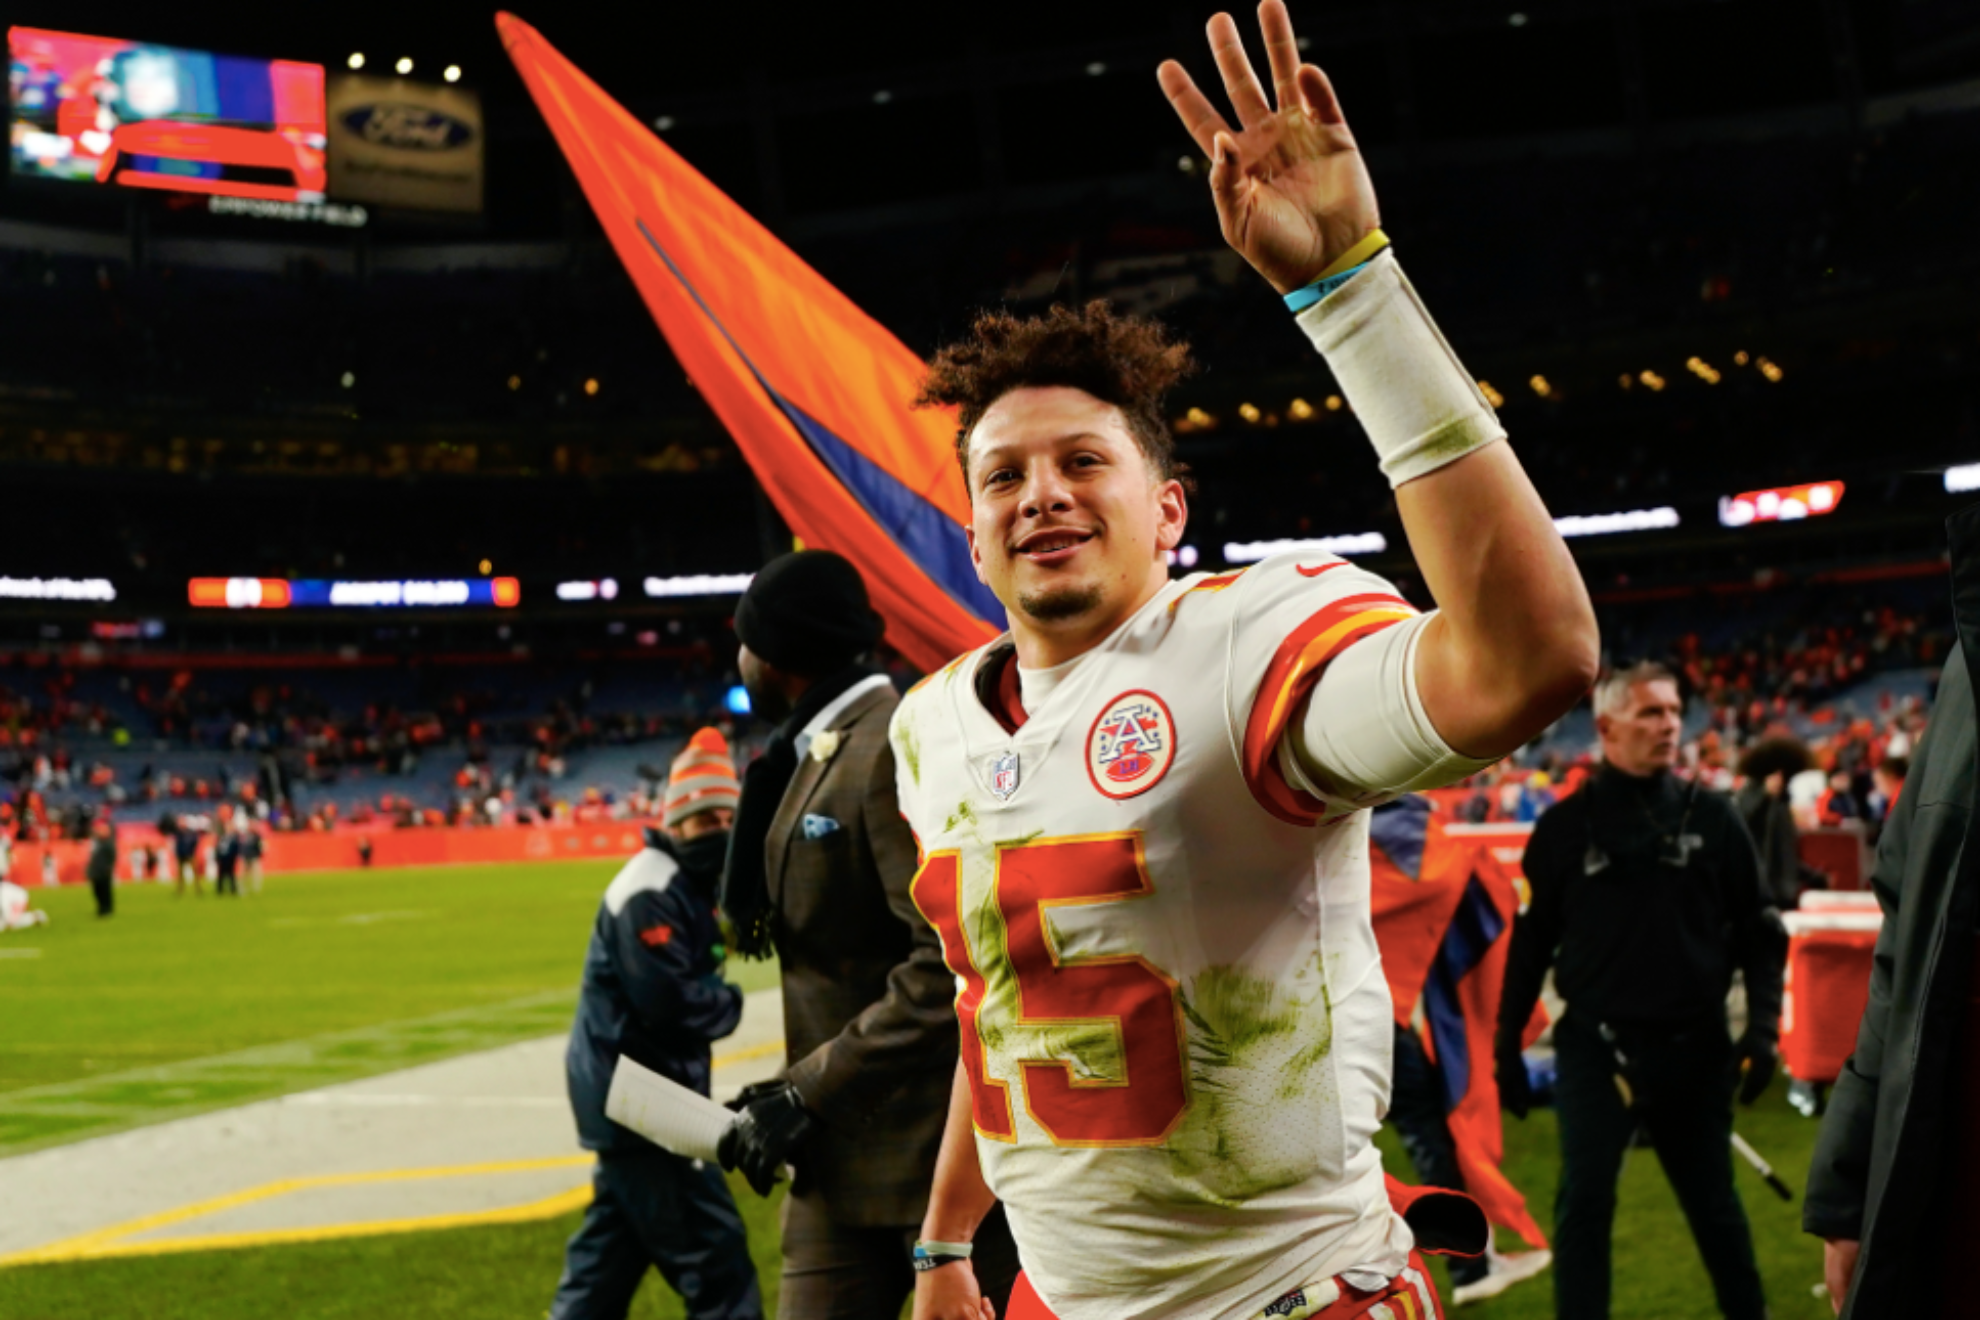 The training help that NFL star Mahomes has offered to Lance